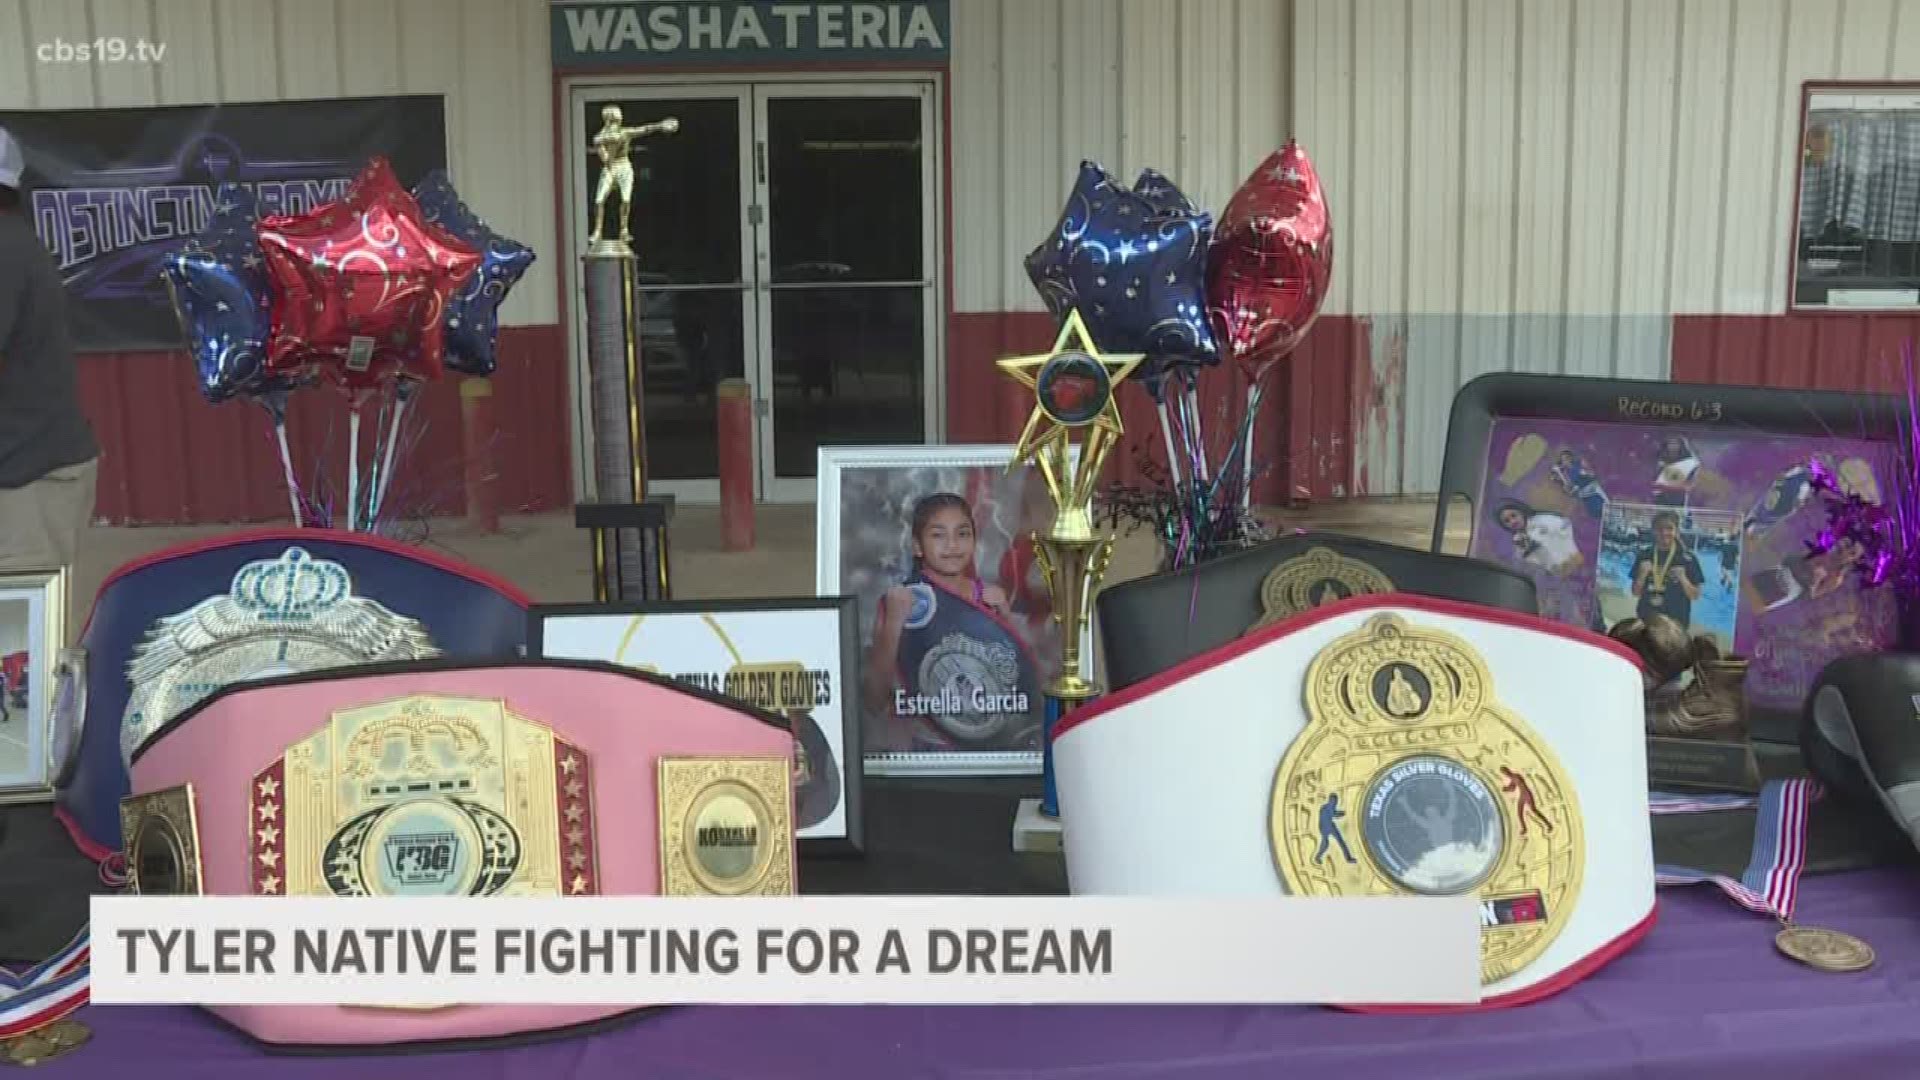 Deja Estrella Garcia is the Junior Olympics Texas State Champion in boxing. Now, she's preparing for a win at nationals.